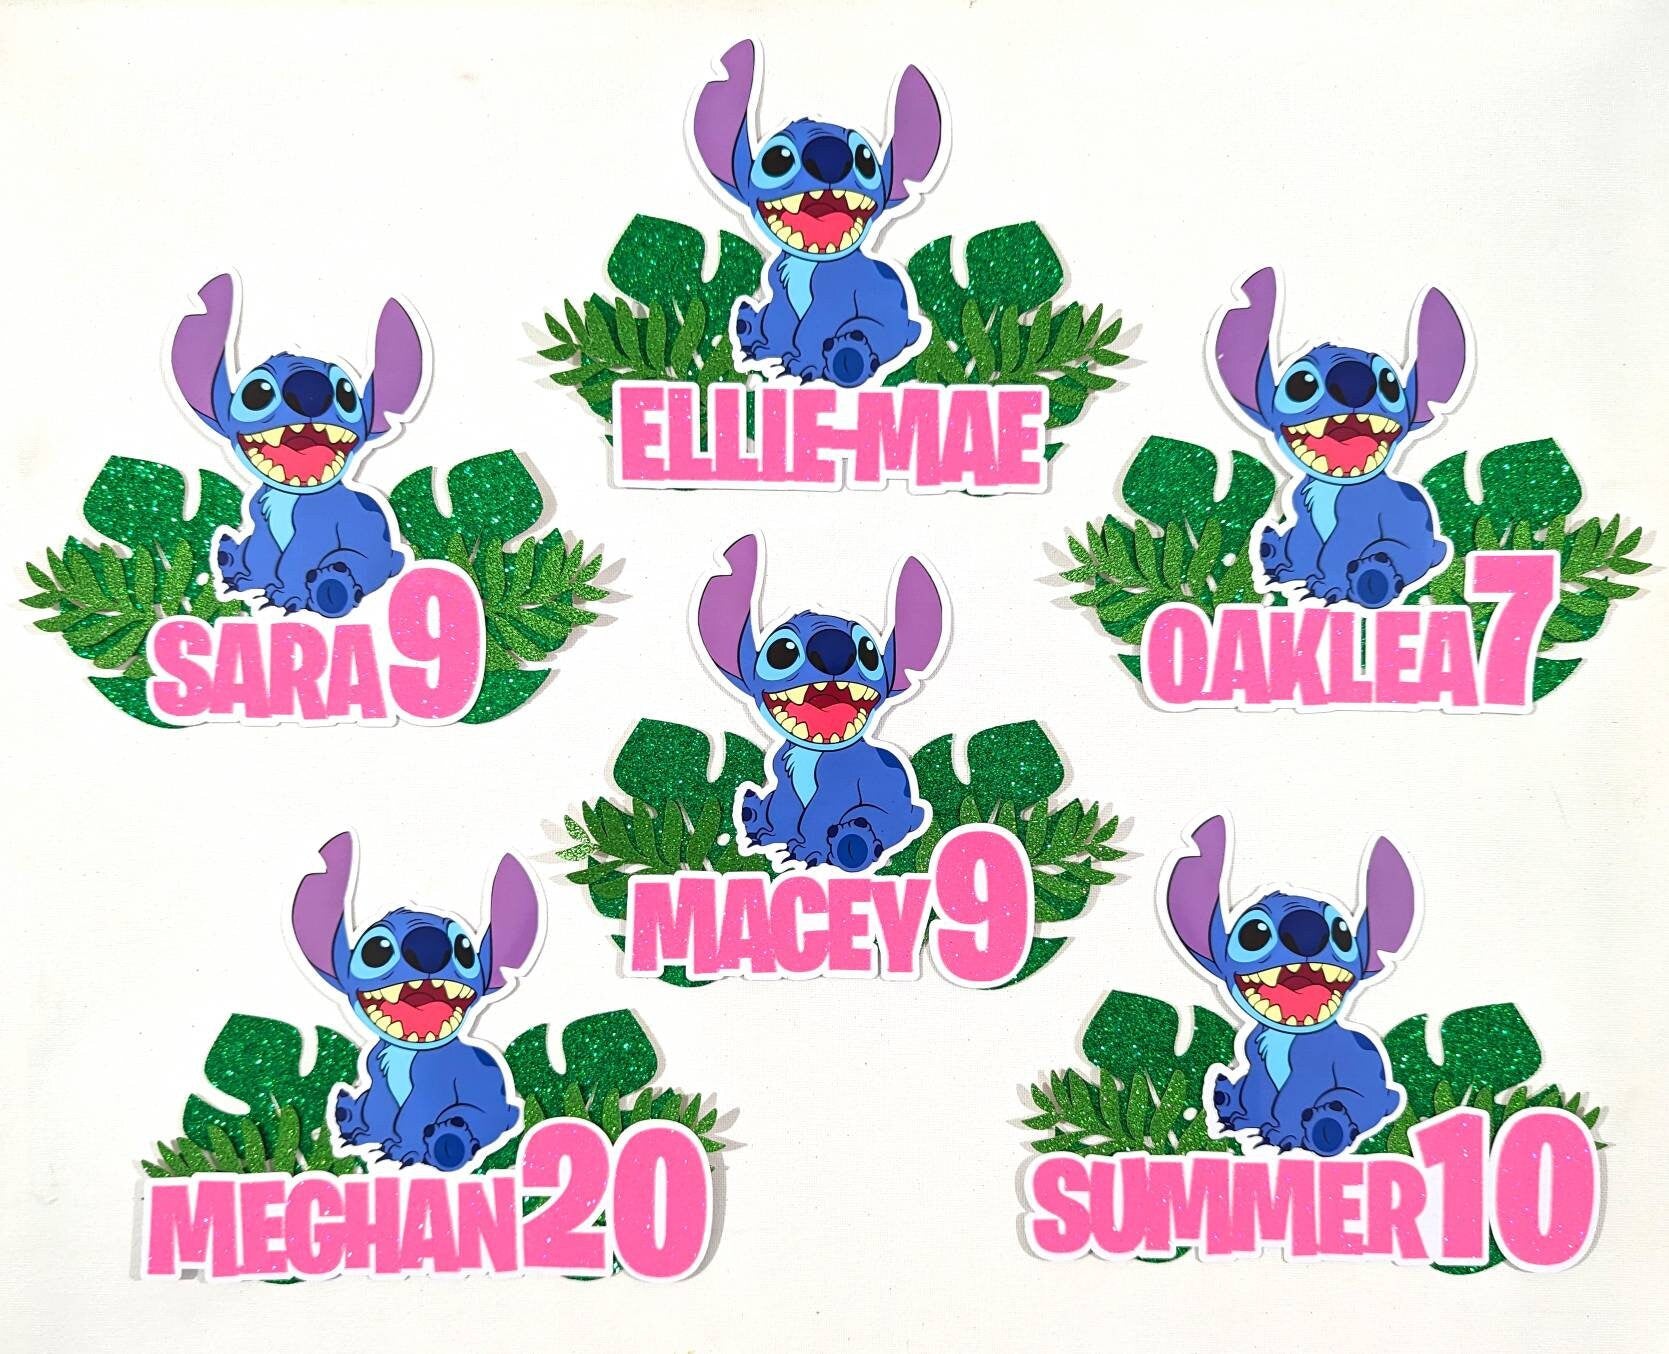 Stitch Cake Topper Free Personalisation Free Delivery Non Edible